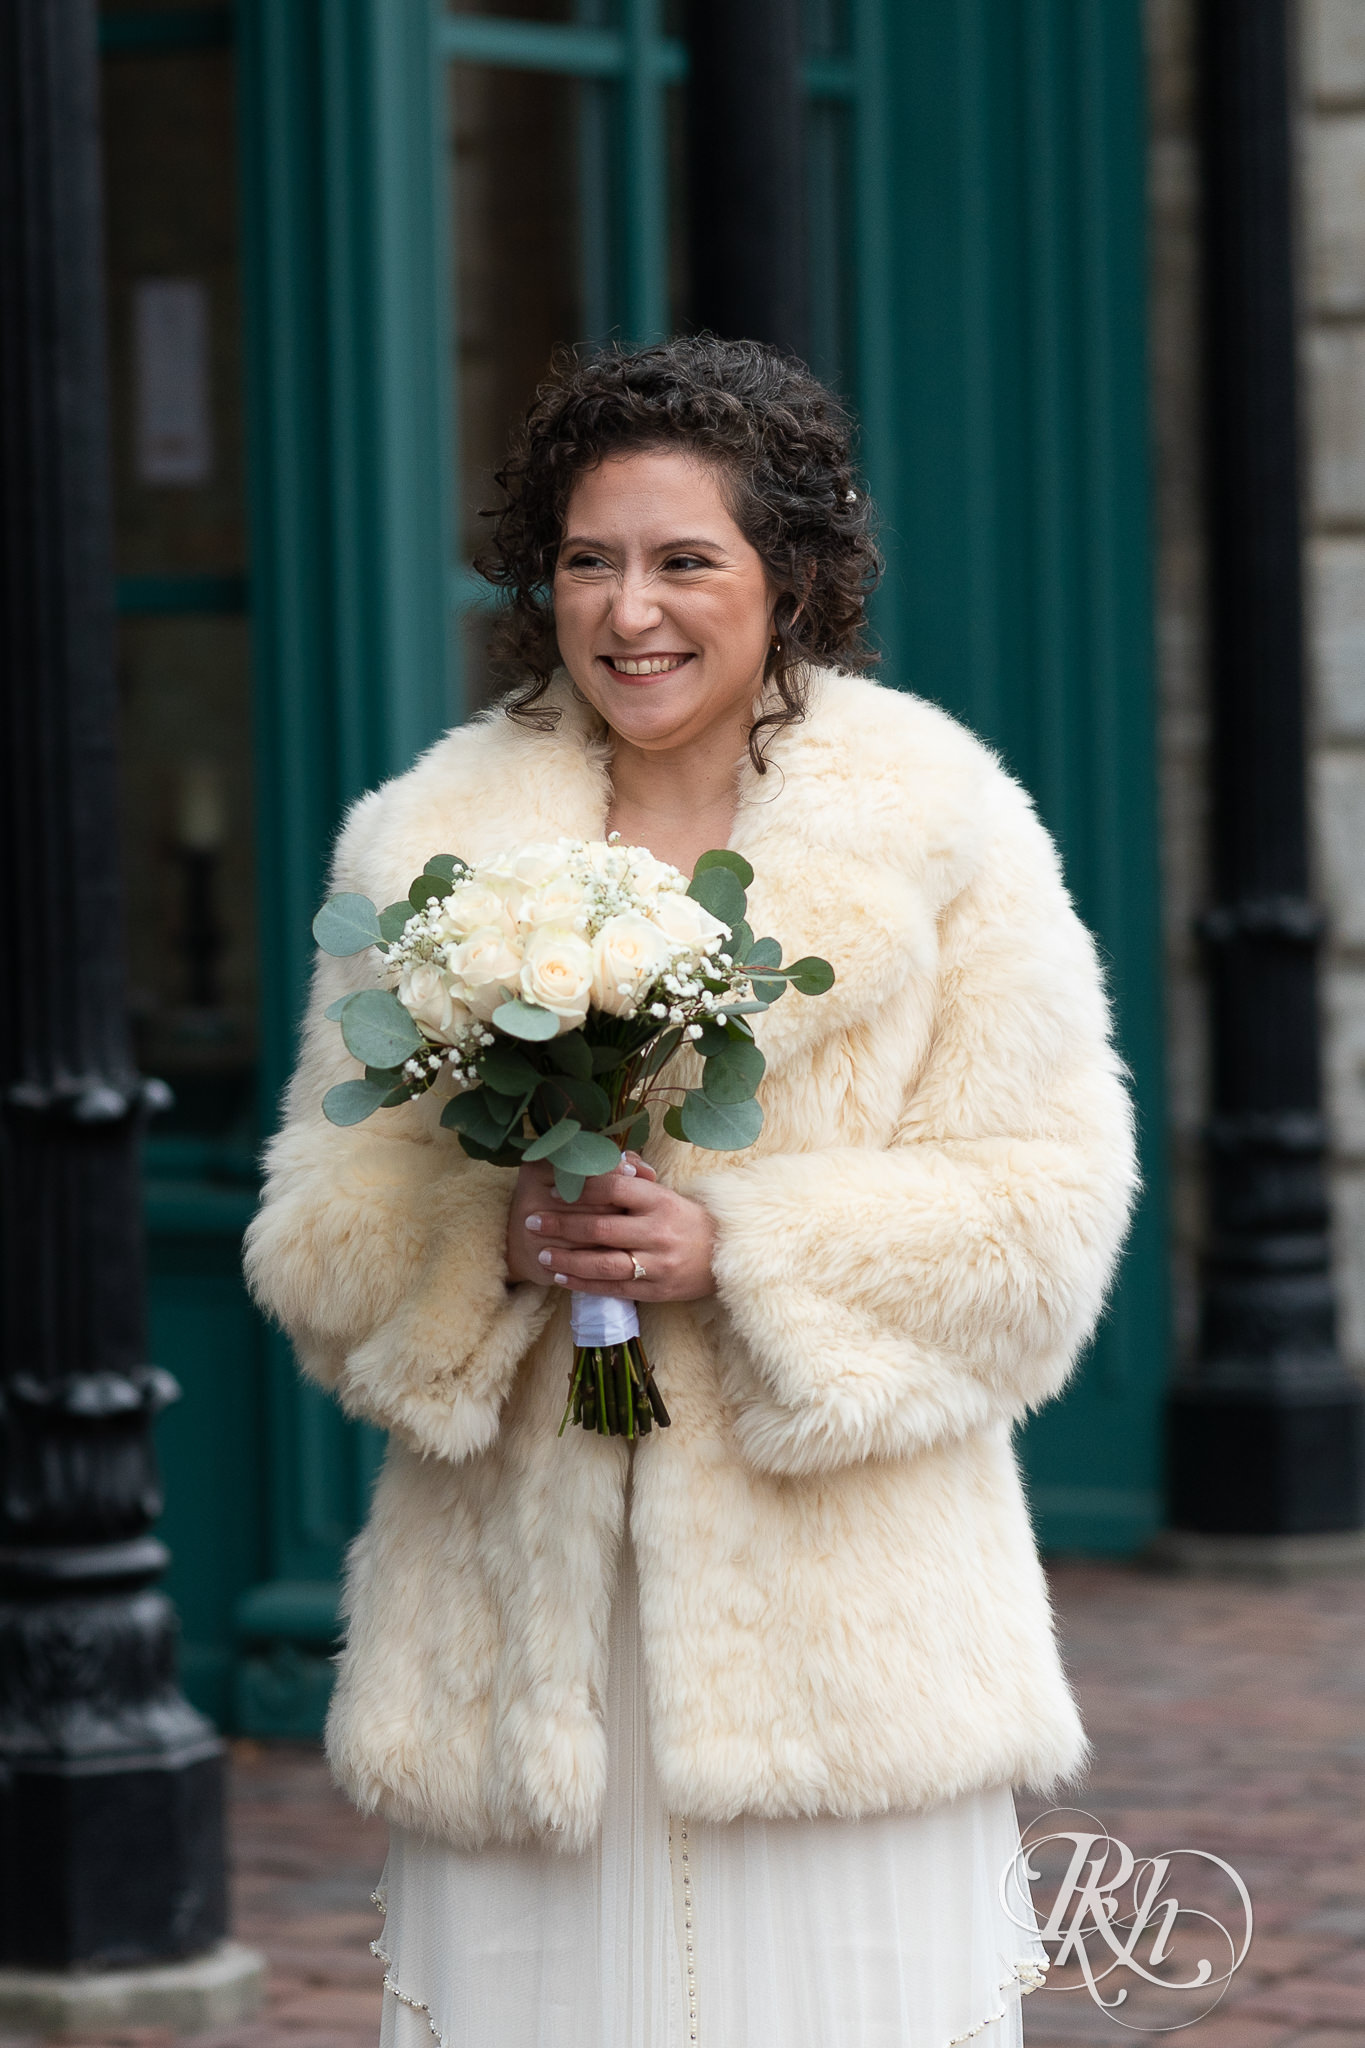 A bride holds a bouquet in her dress and fur coat in Saint Anthony Main, Minneapolis, Minnesota.